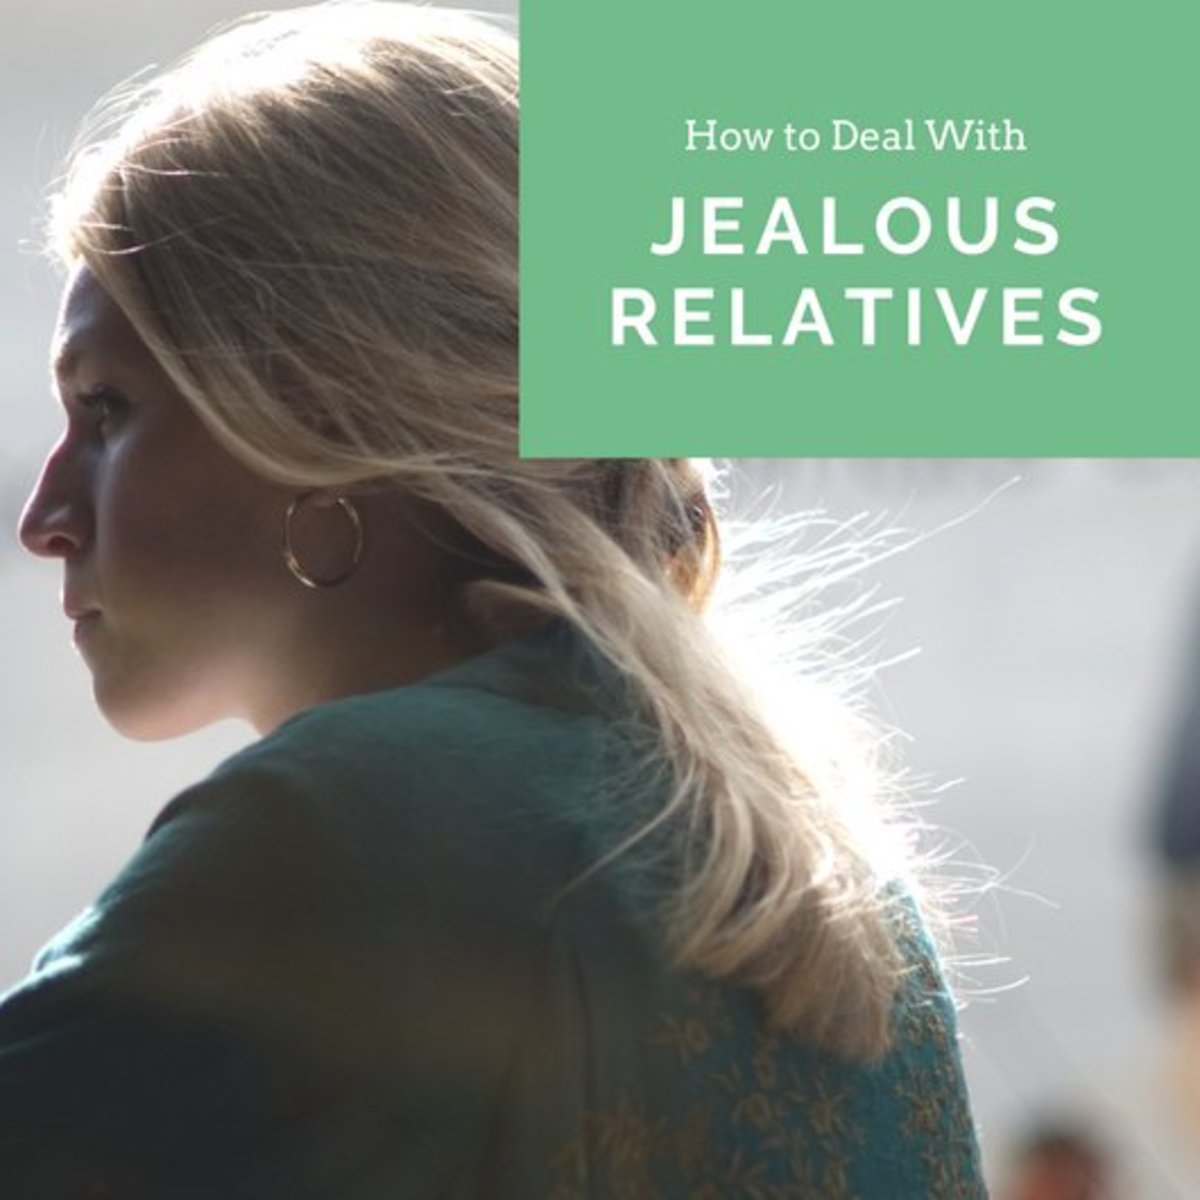 Signs of Jealous Family Members and How to Deal With Them